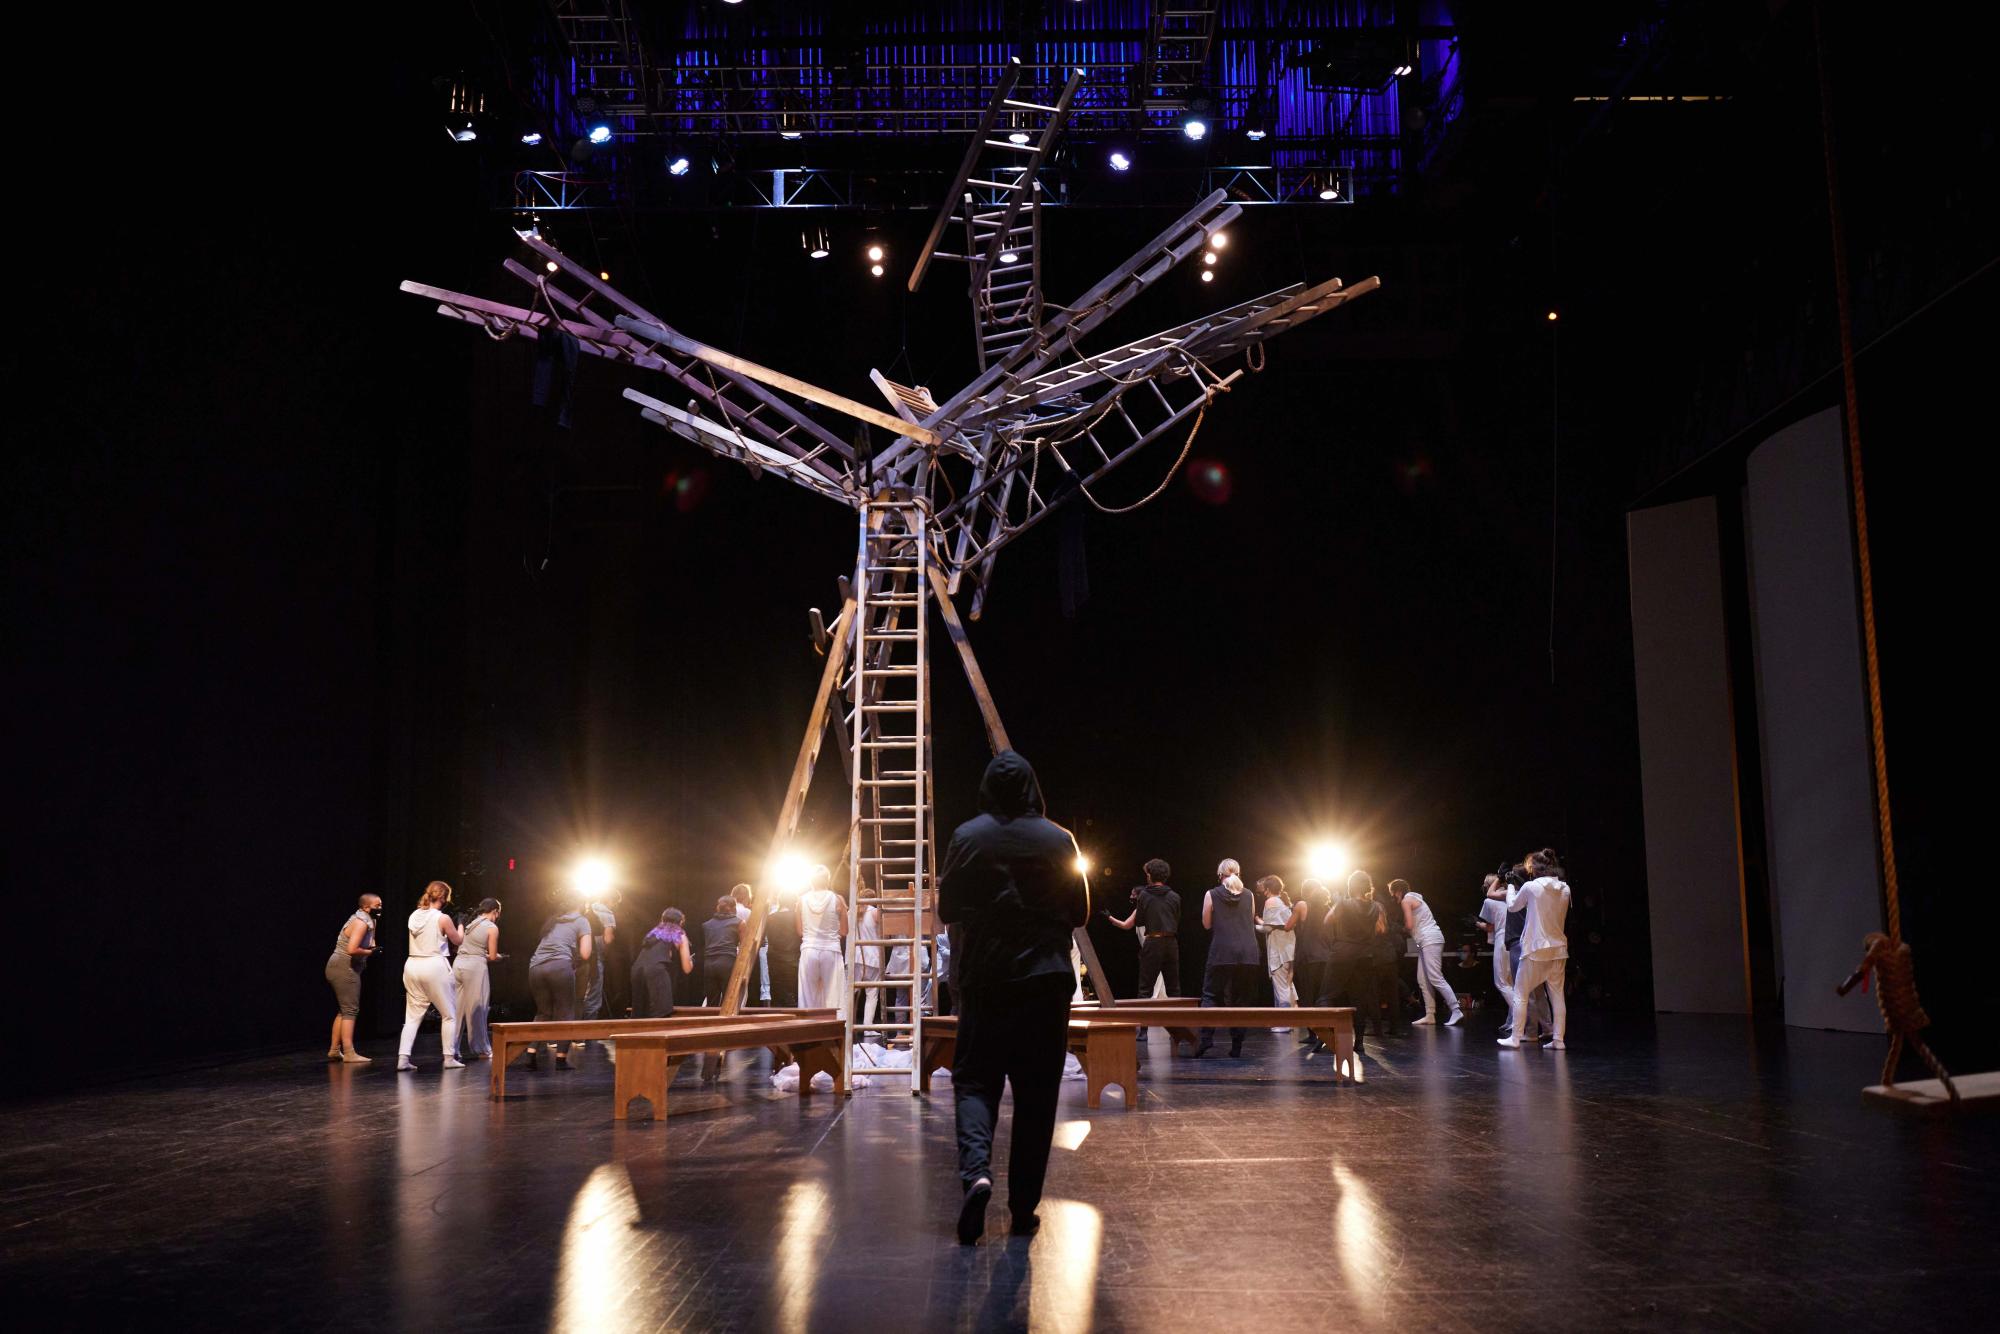 dancer in all black with his hood up walks towards an ensemble of dancers and a tree-like structure made of ladders